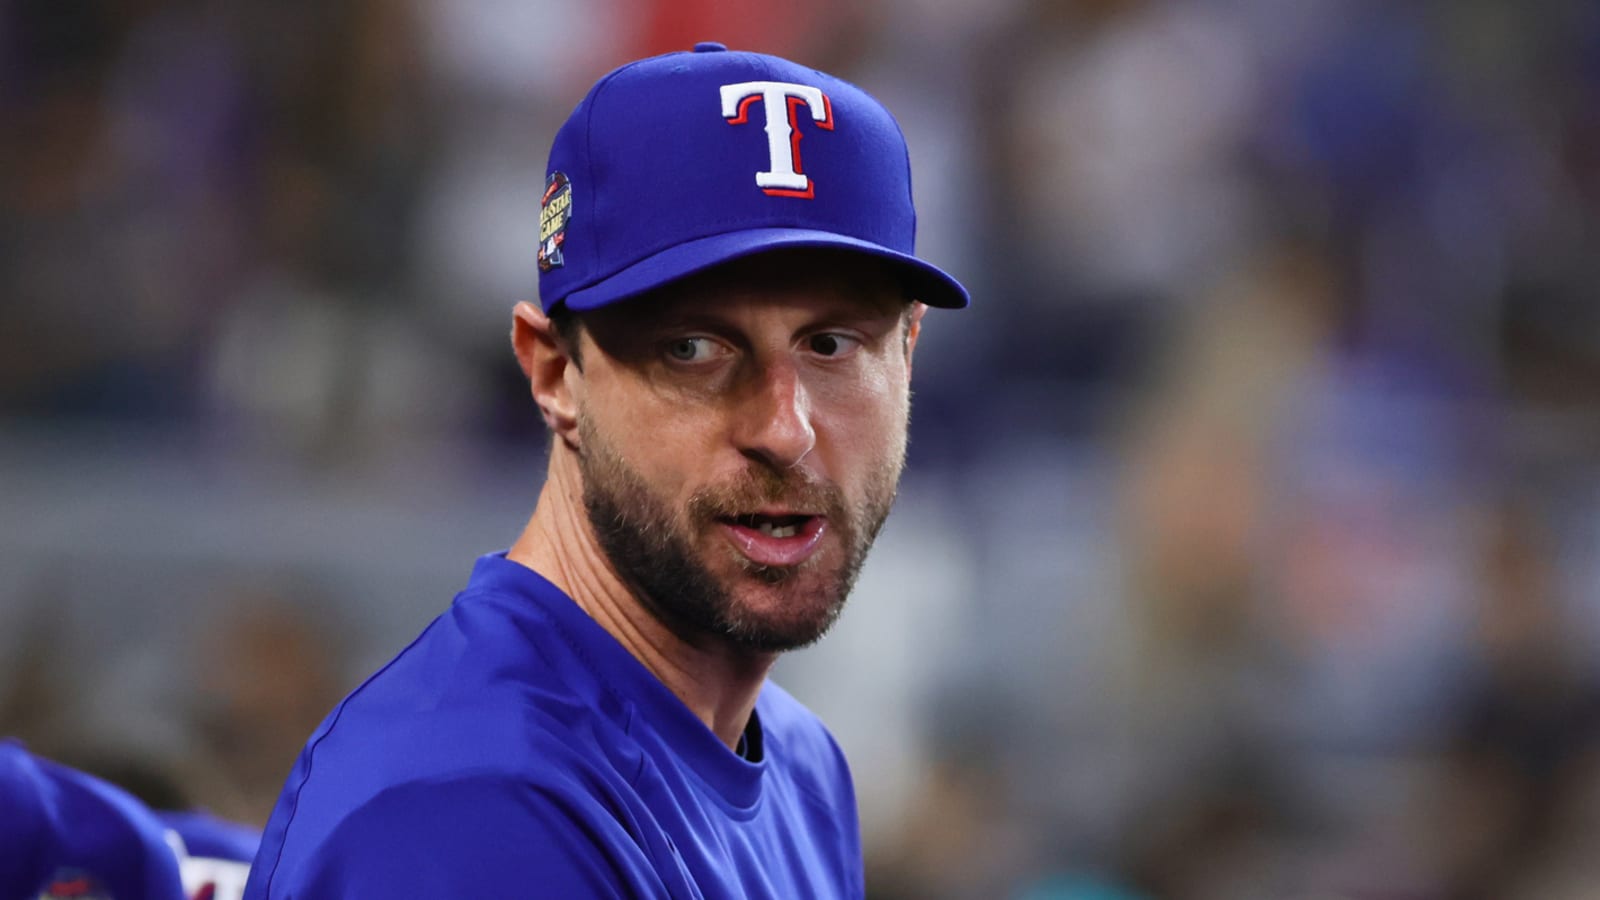 Rangers' Max Scherzer reflects on controversial Mets exit